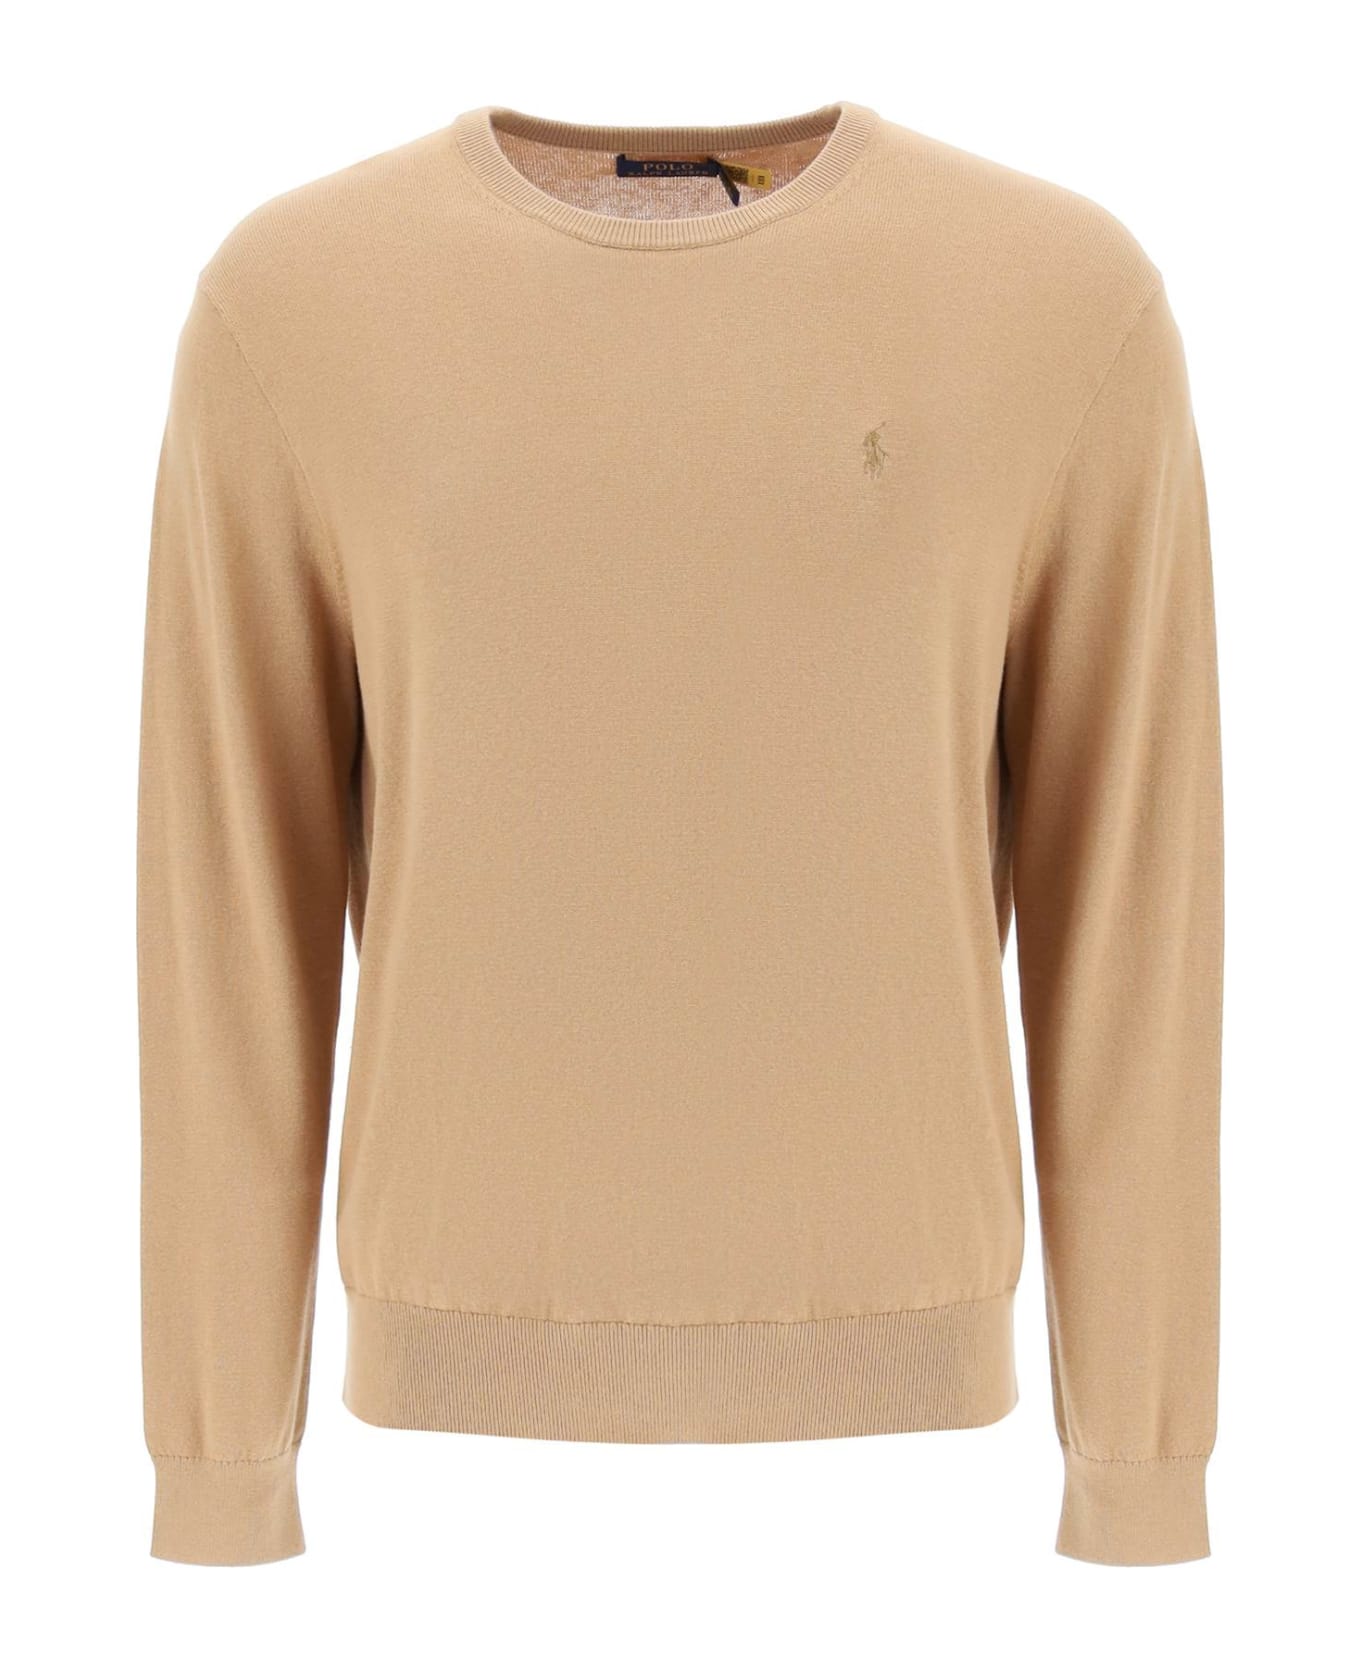 Polo Ralph Lauren Sweater In Cotton And Cashmere - BURLAP TAN (Beige)